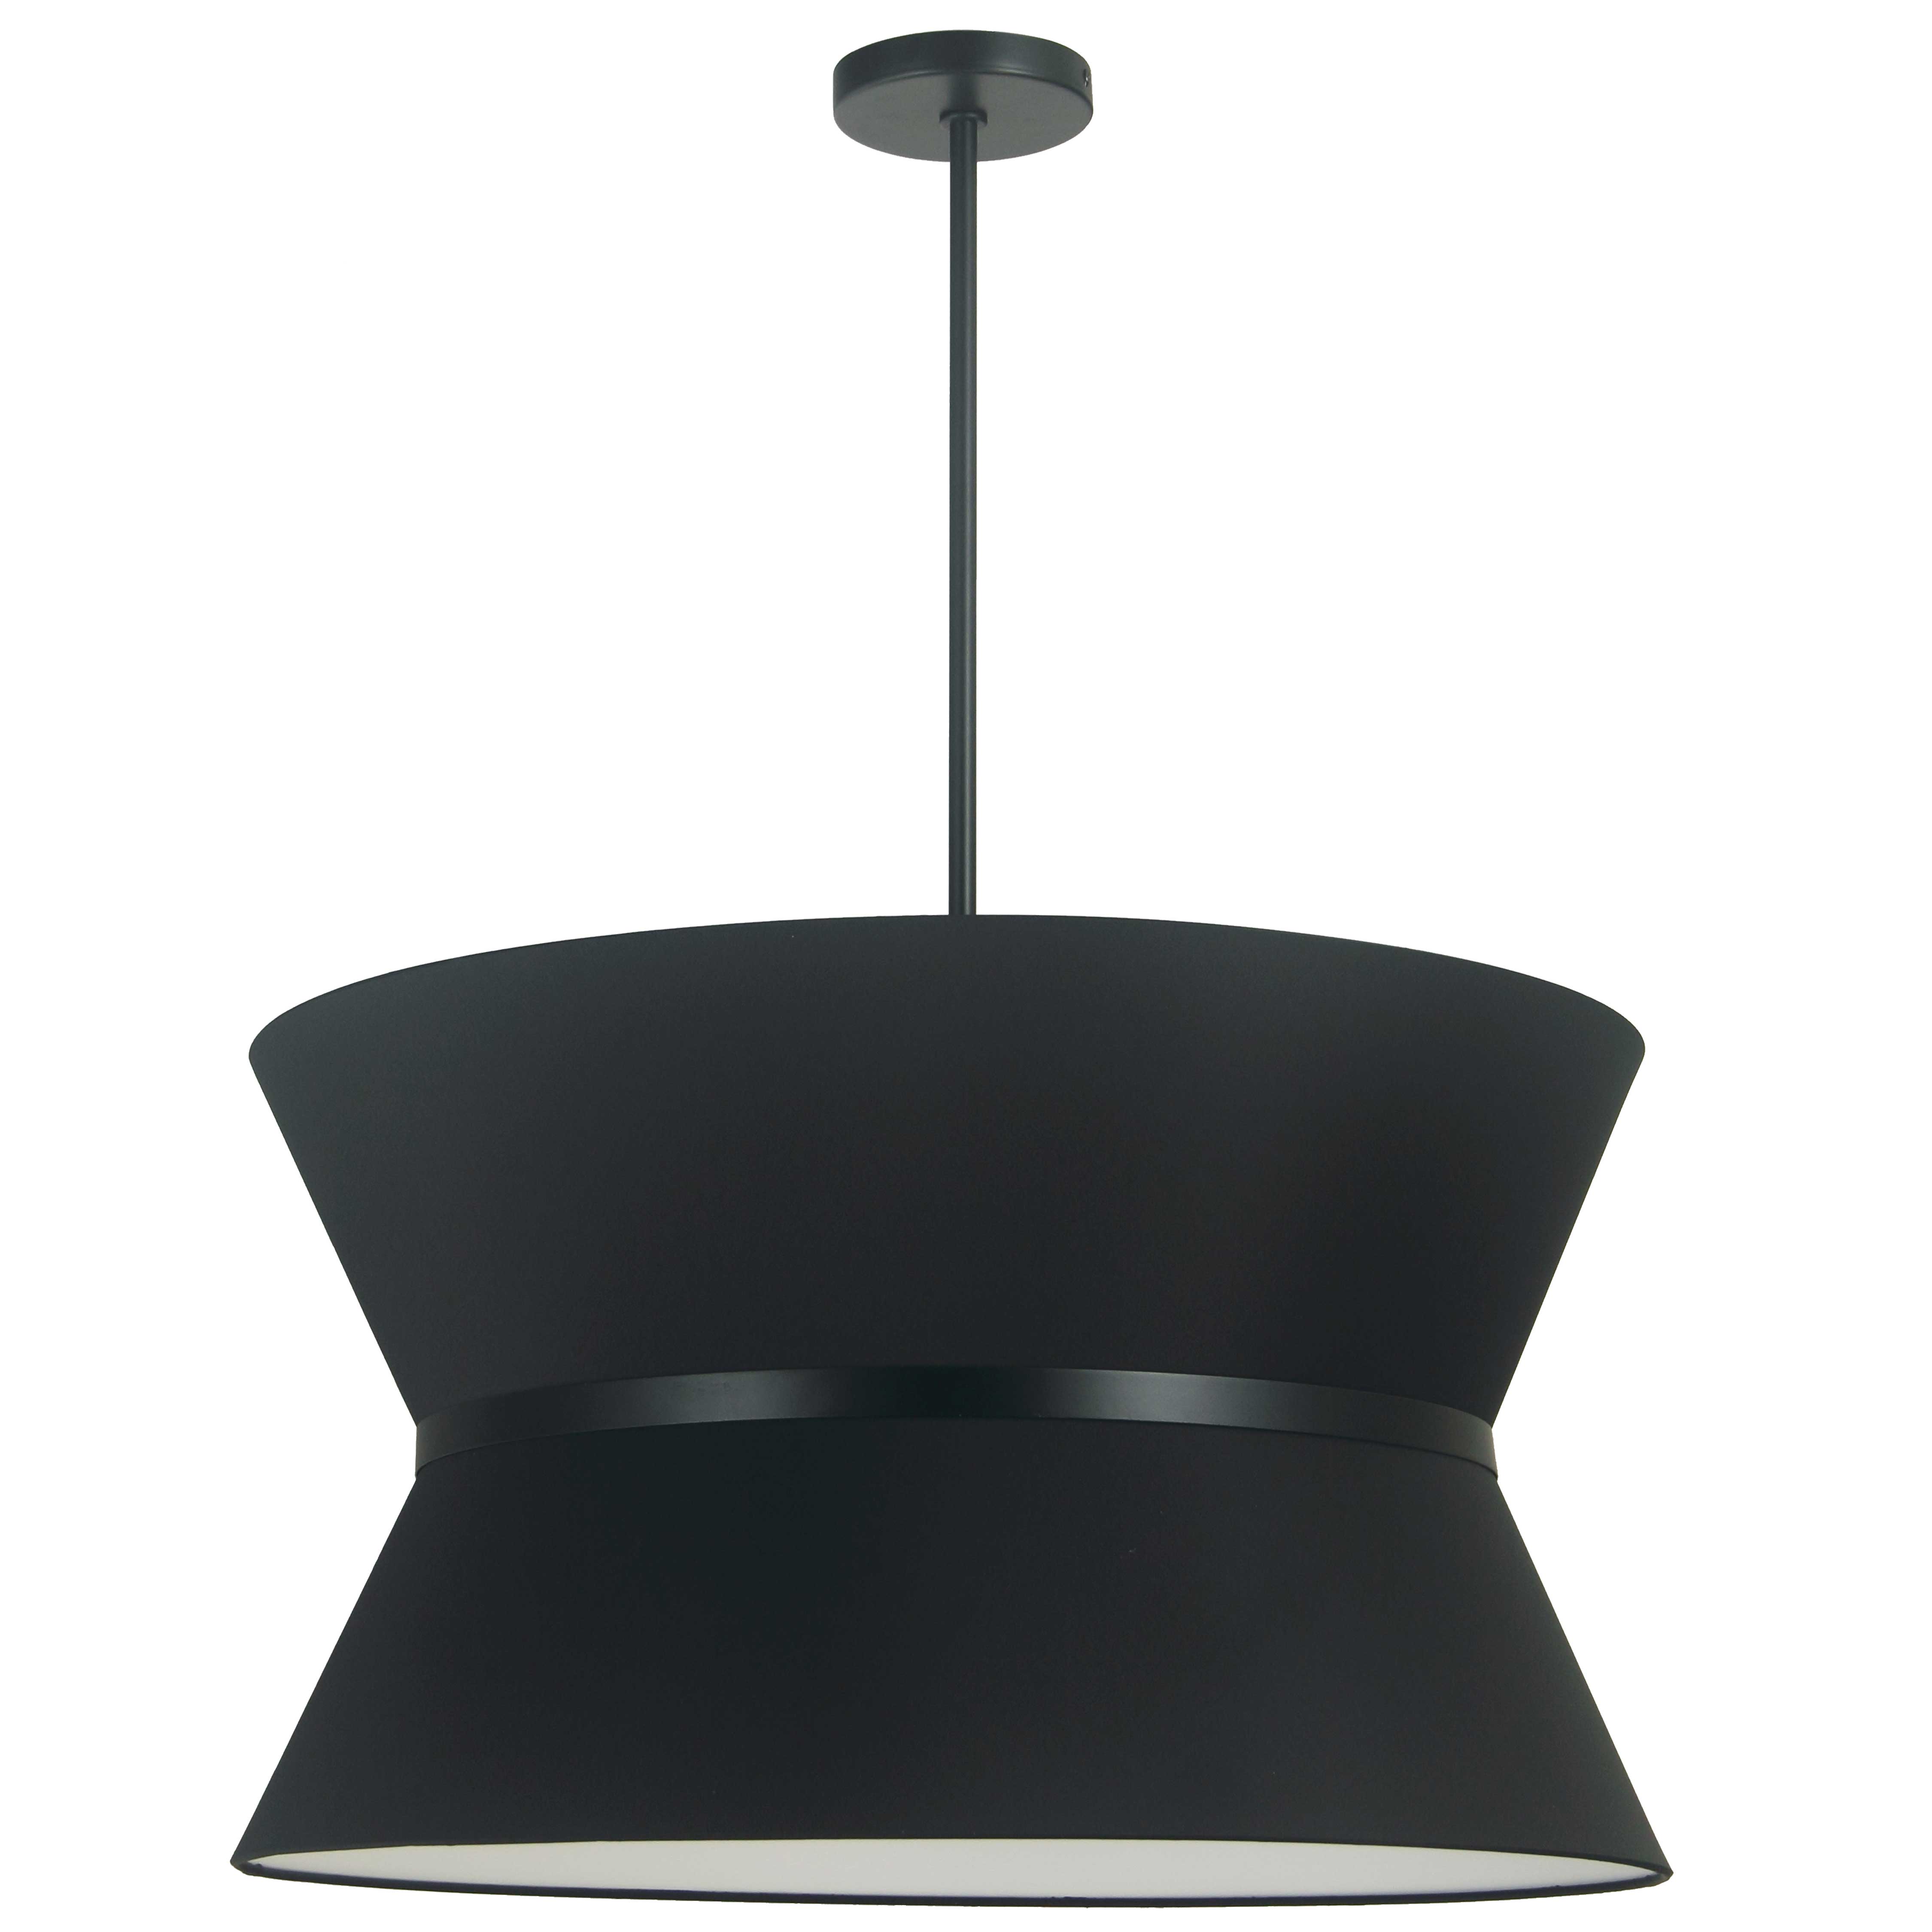 The Caterine family of lighting incorporates an elegant tiered design based on bold contrasts. With options as both pendant and chandelier lighting, Caterine will unify home décor with a luxurious touch.  A drop base in metal with a choice of finishes ends with a cinched fabric shade, adding fluid lines to sleek minimalism or modernist décors. The shade is banded, and comes in a choice of chic base/shade/band combinations. The transitional design will blend with mid-century to ultra modern furnishings, making a statement with a small footprint adaptable to any area.